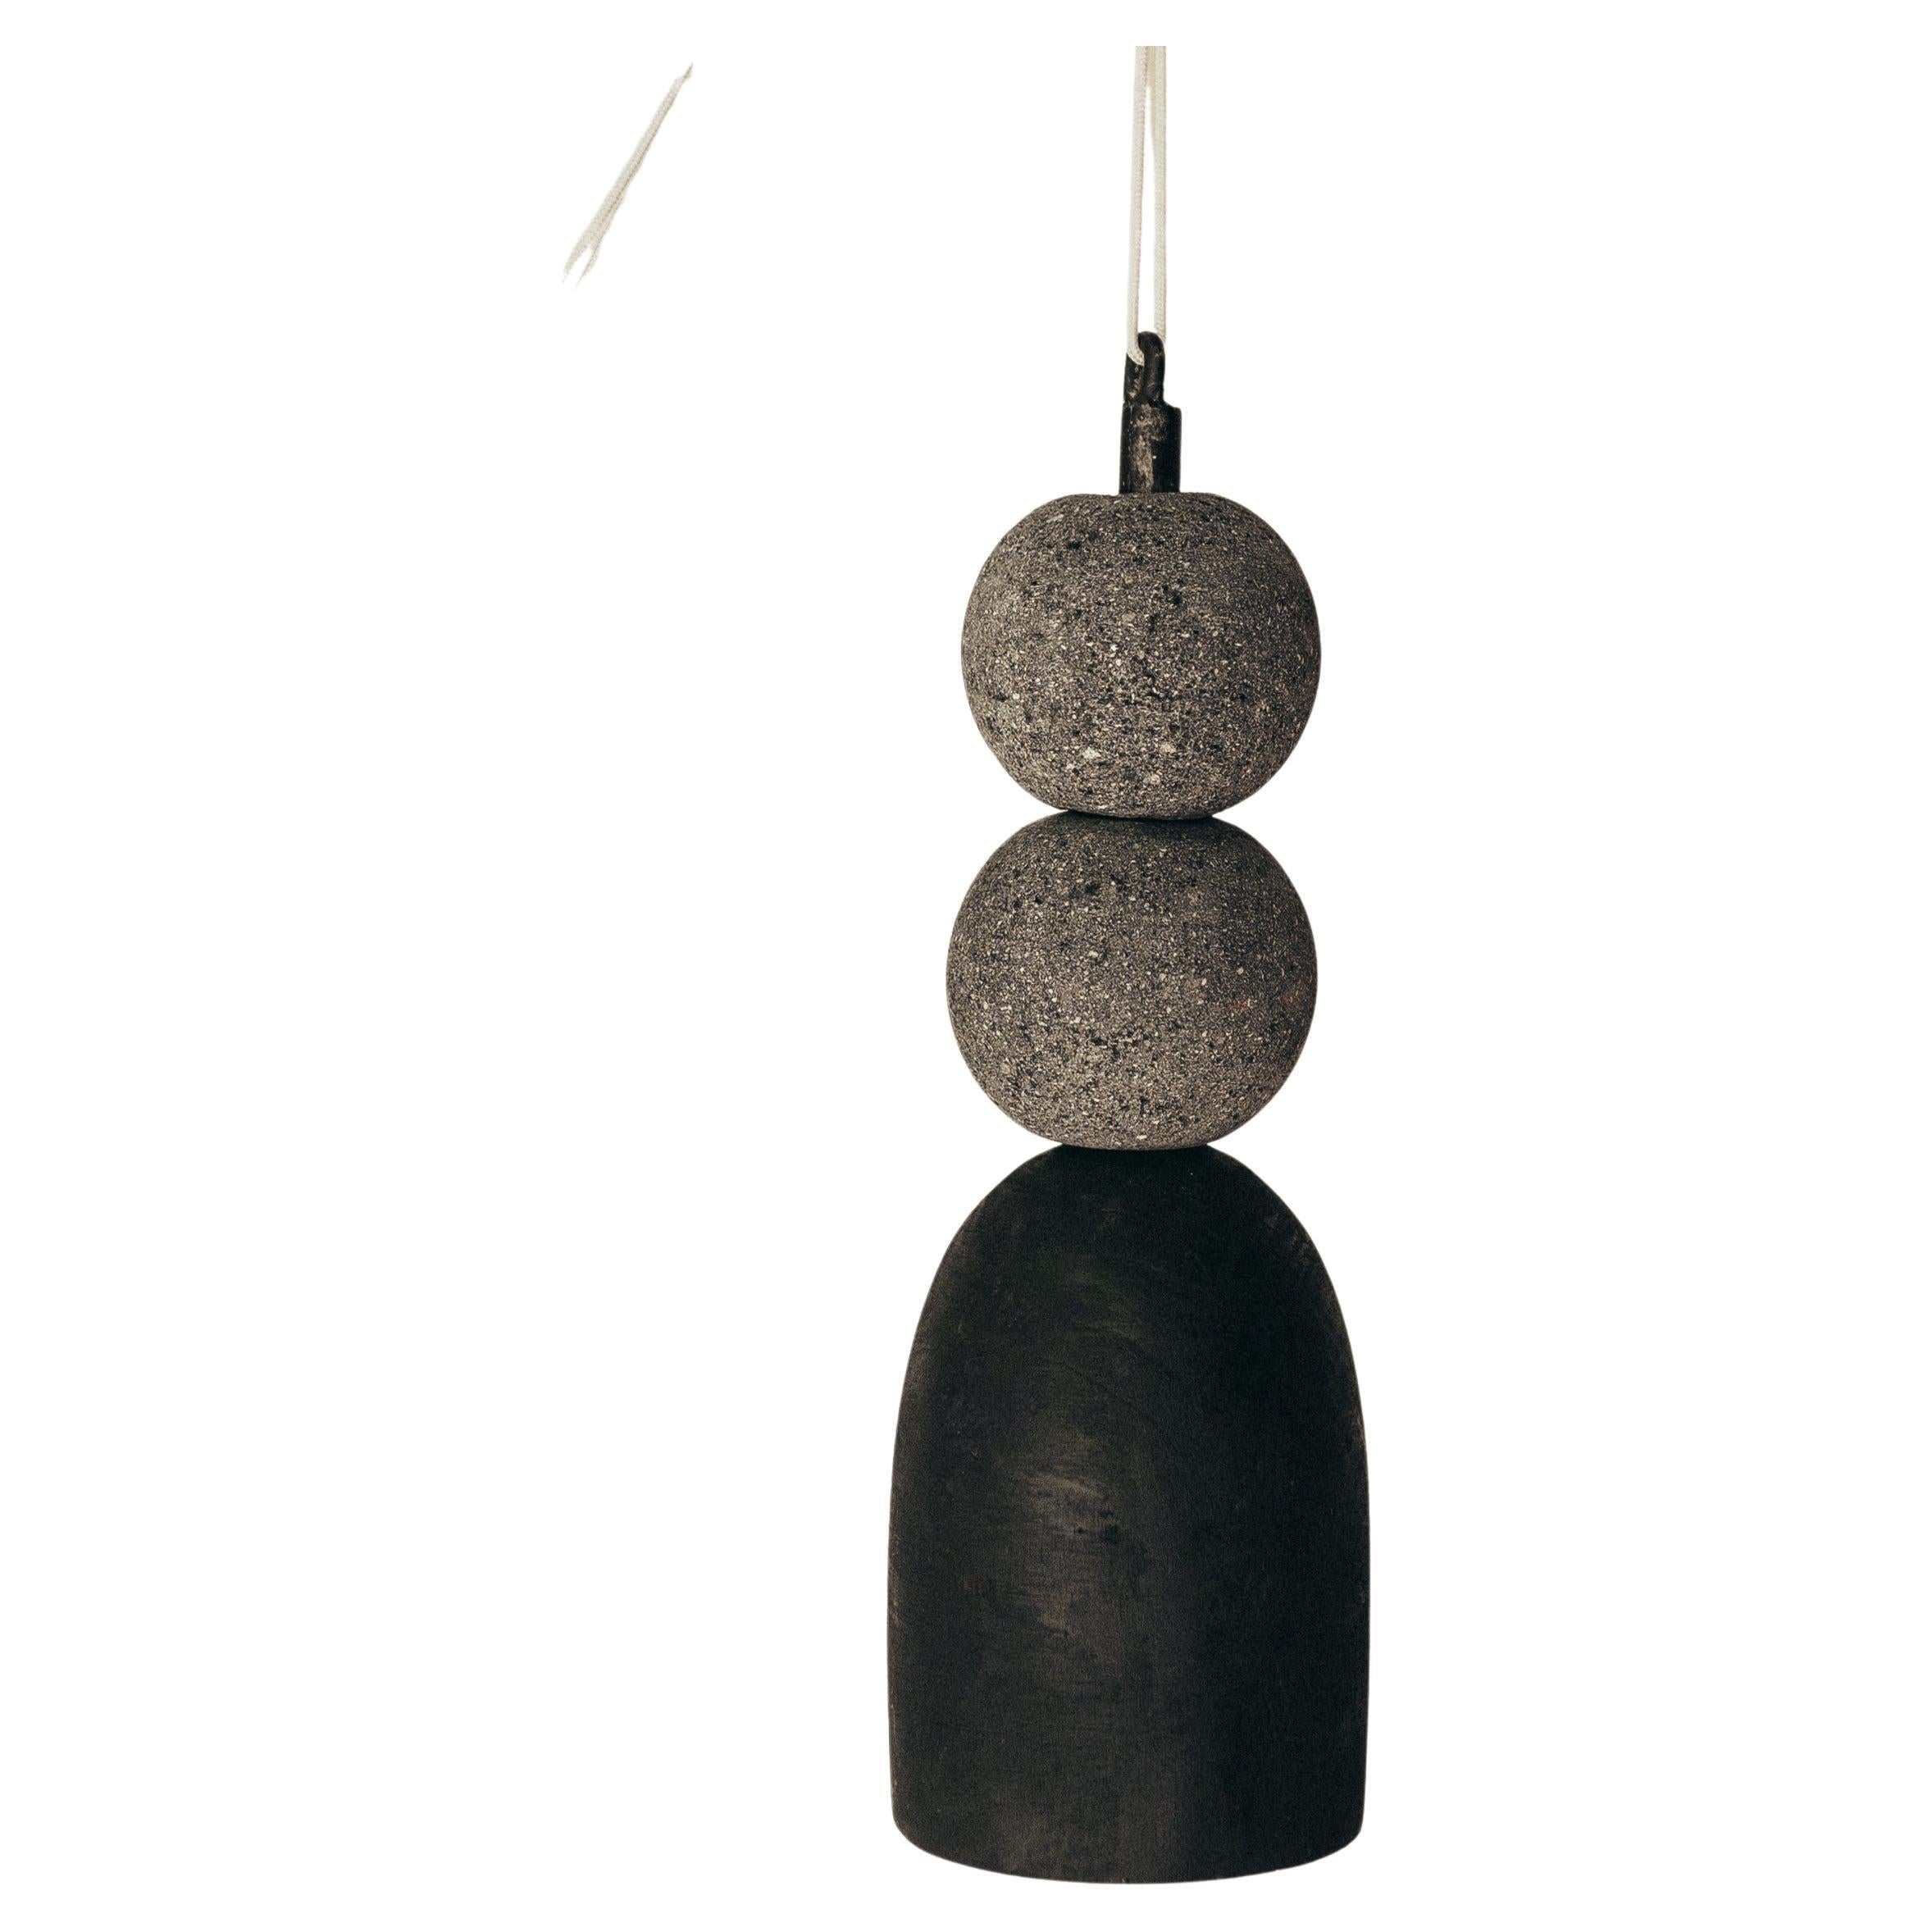 Pendant Lamp with Volcanic Stone Balls and Burnt Wood by Daniel Orozco